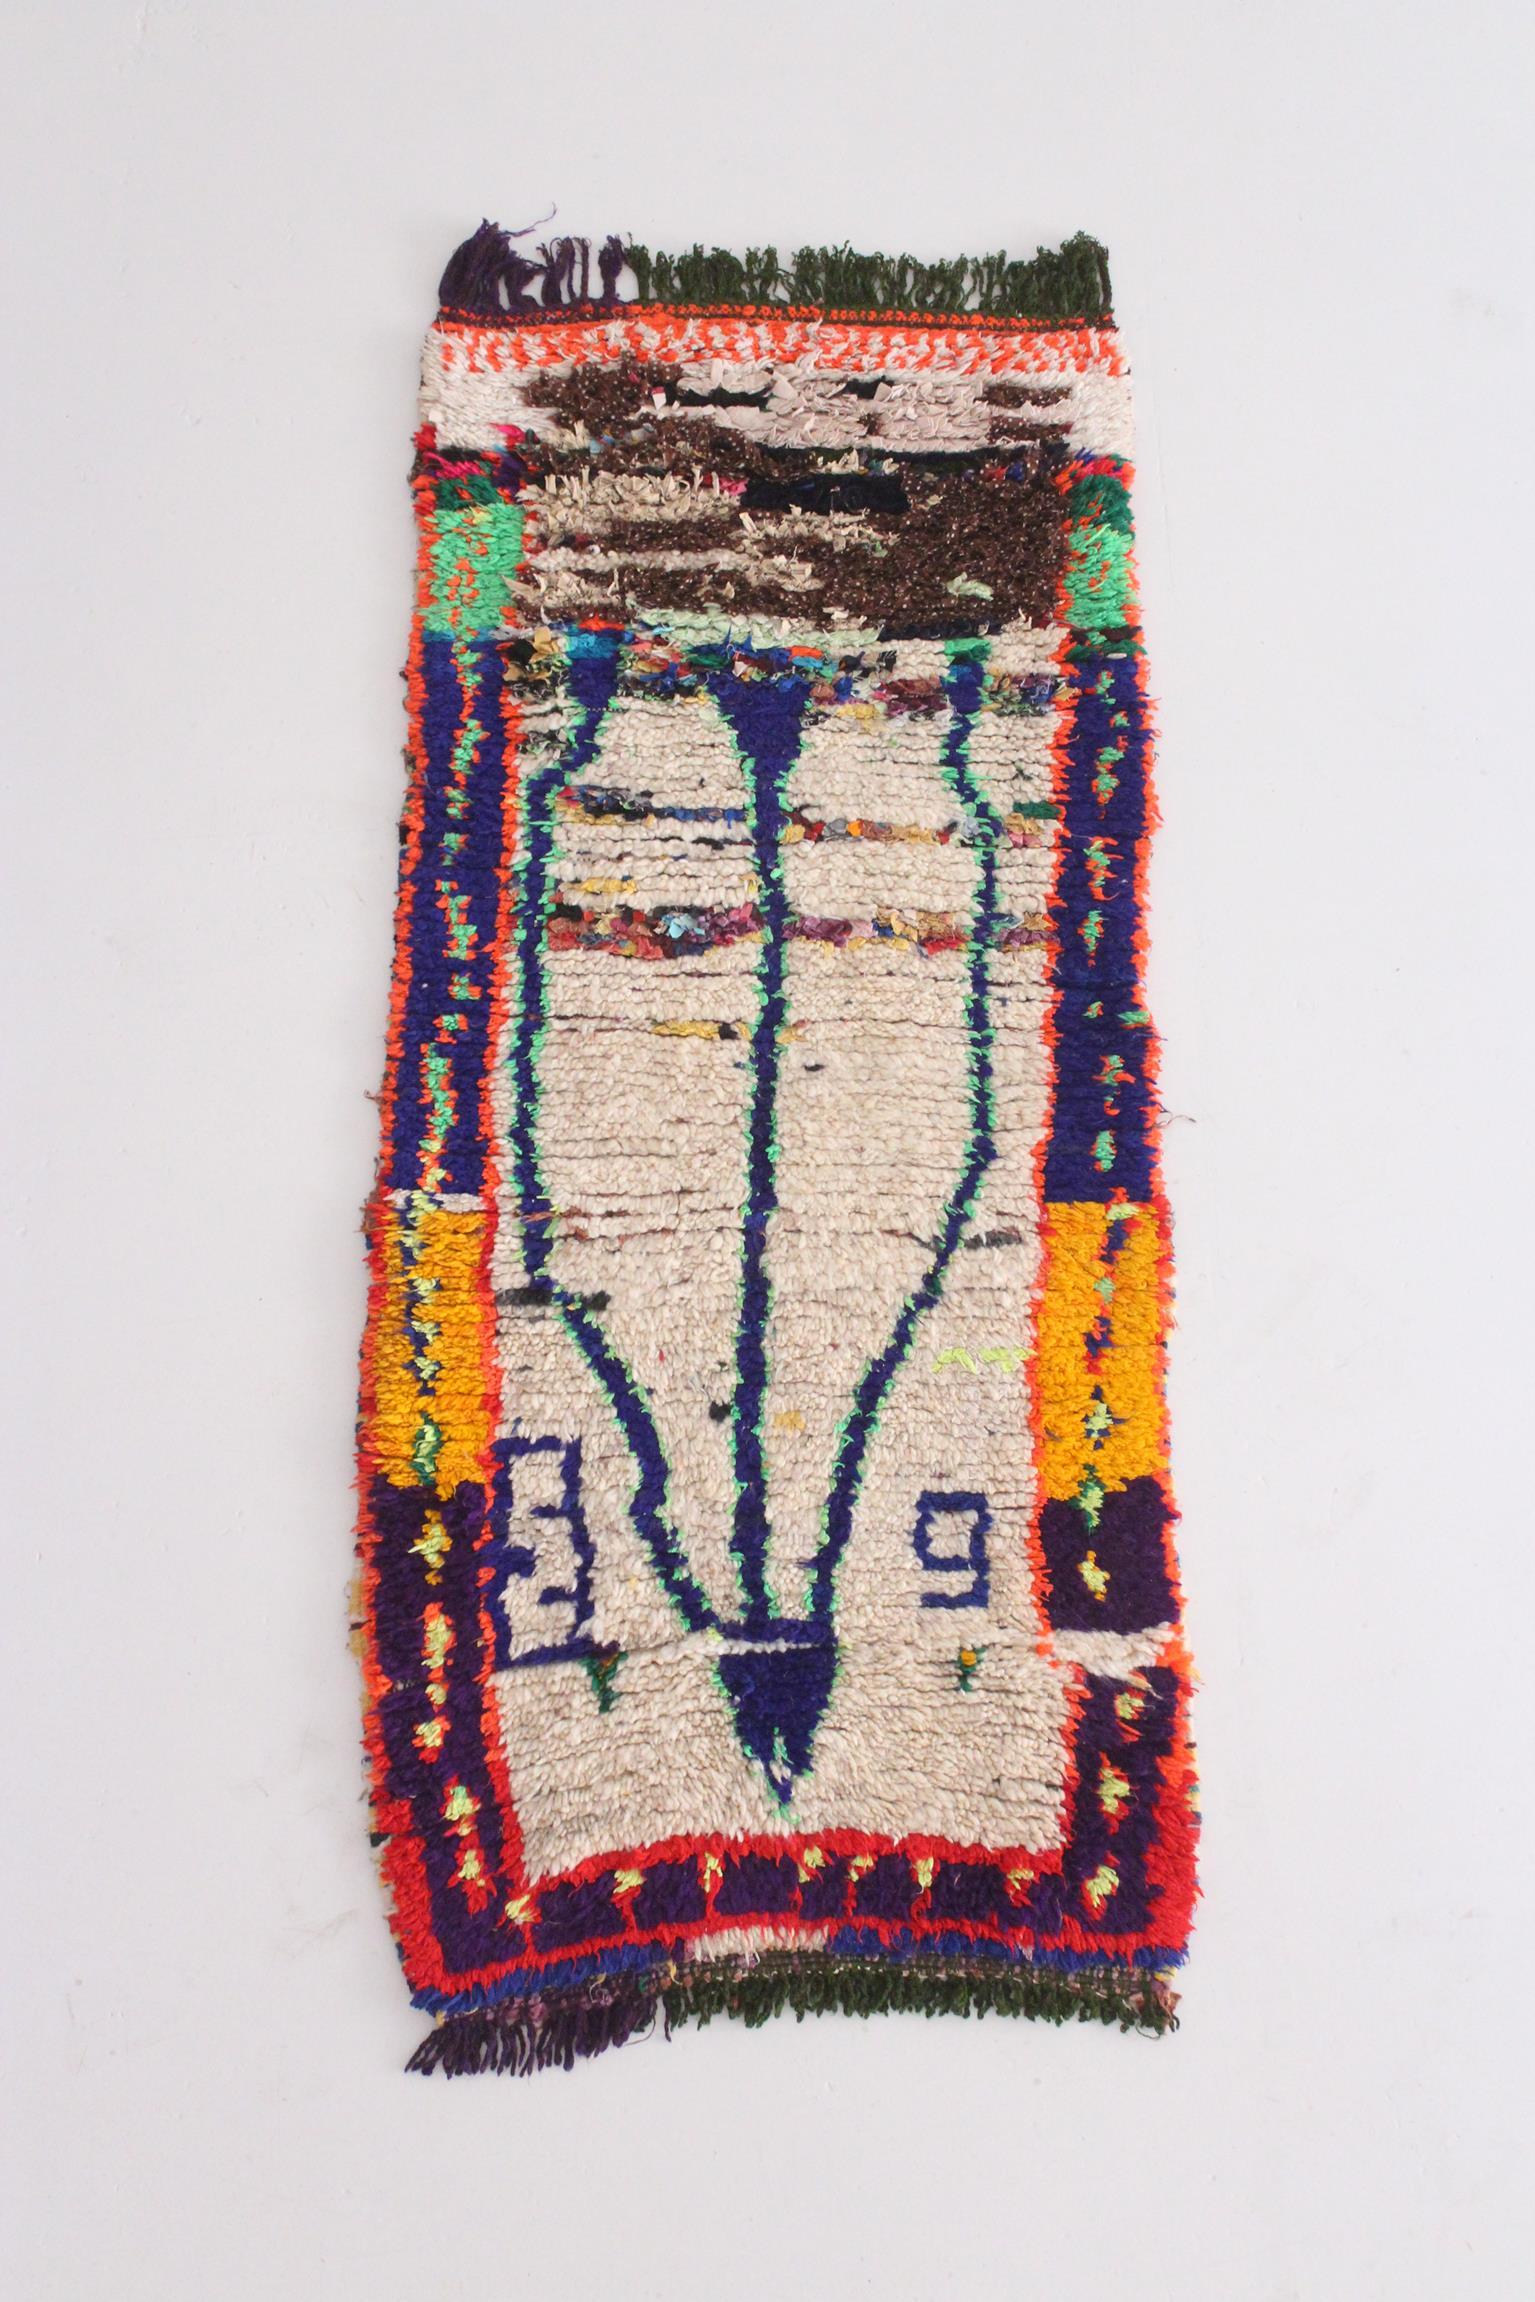 This lovely vintage runner rug has been sourced in the area of Azilal, Morocco. It is made of multiple, colorful cotton threads, recycled pieces of clothes and wool threads knotted together. Women in Morocco have been using this technique for